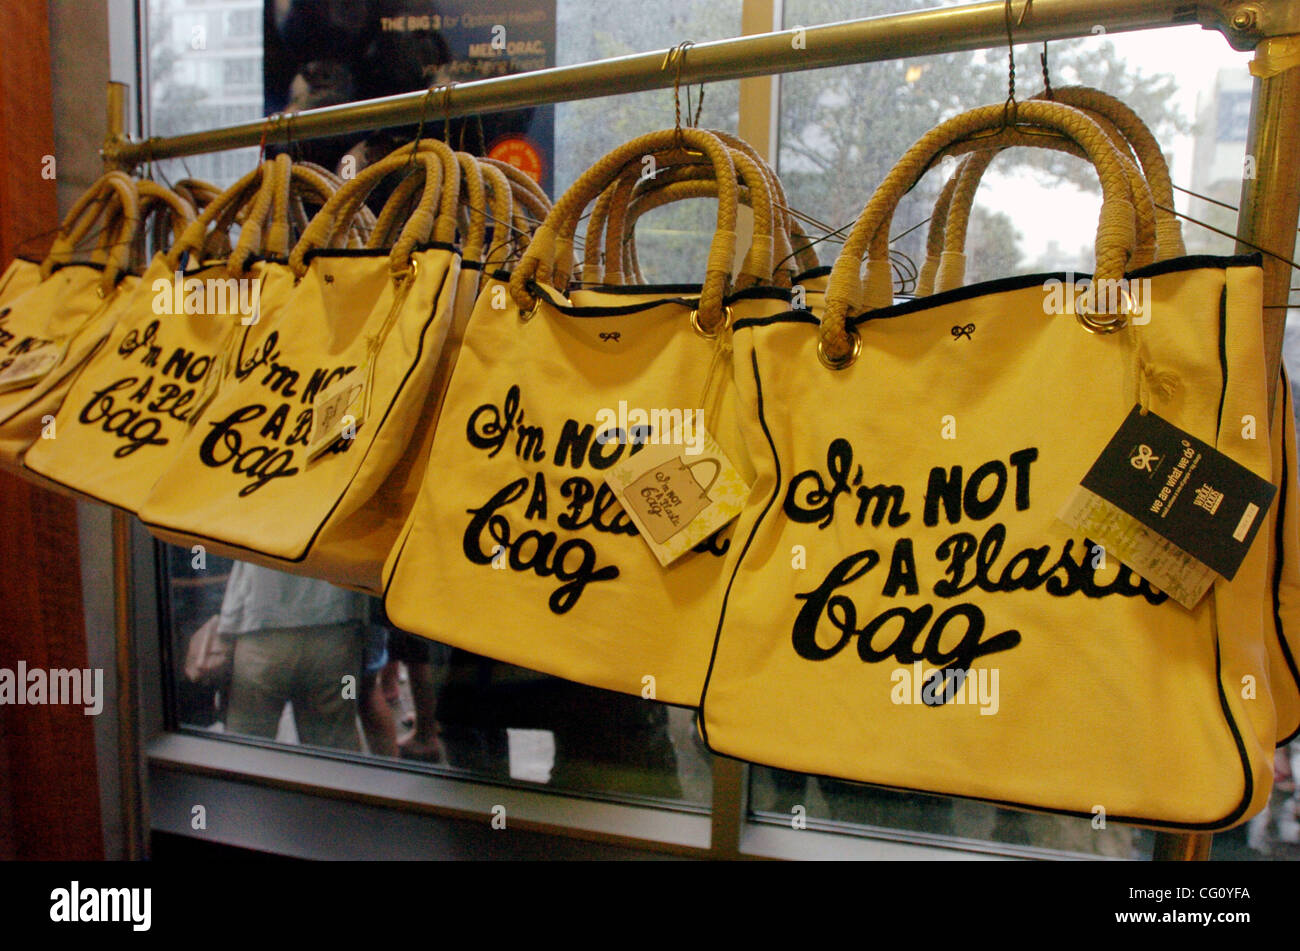 A rack of "I'm Not A Plastic Bag" totes. Thousands line up for Whole Foods Market launch of "I'm Not A Plastic Bag" shopping totes designed by Anya Hindmarch at select Whole Foods Markets in New York City. Designer Anya Hindmarch is on location at the Whole Foods Market Bowery for the New York City  Stock Photo